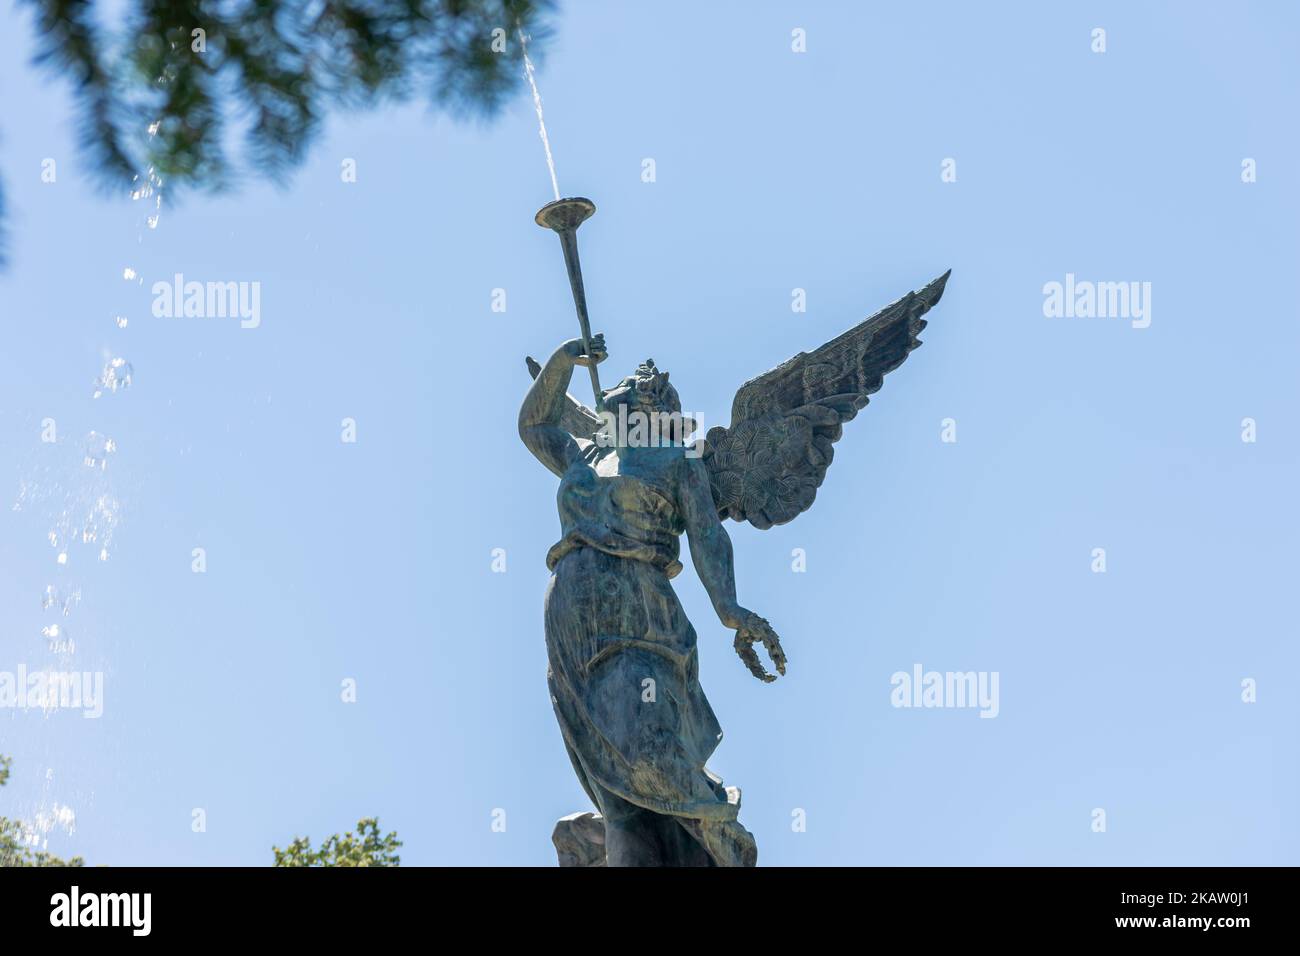 An angel blowing a trumpet figure in a water fountain in a park Stock Photo